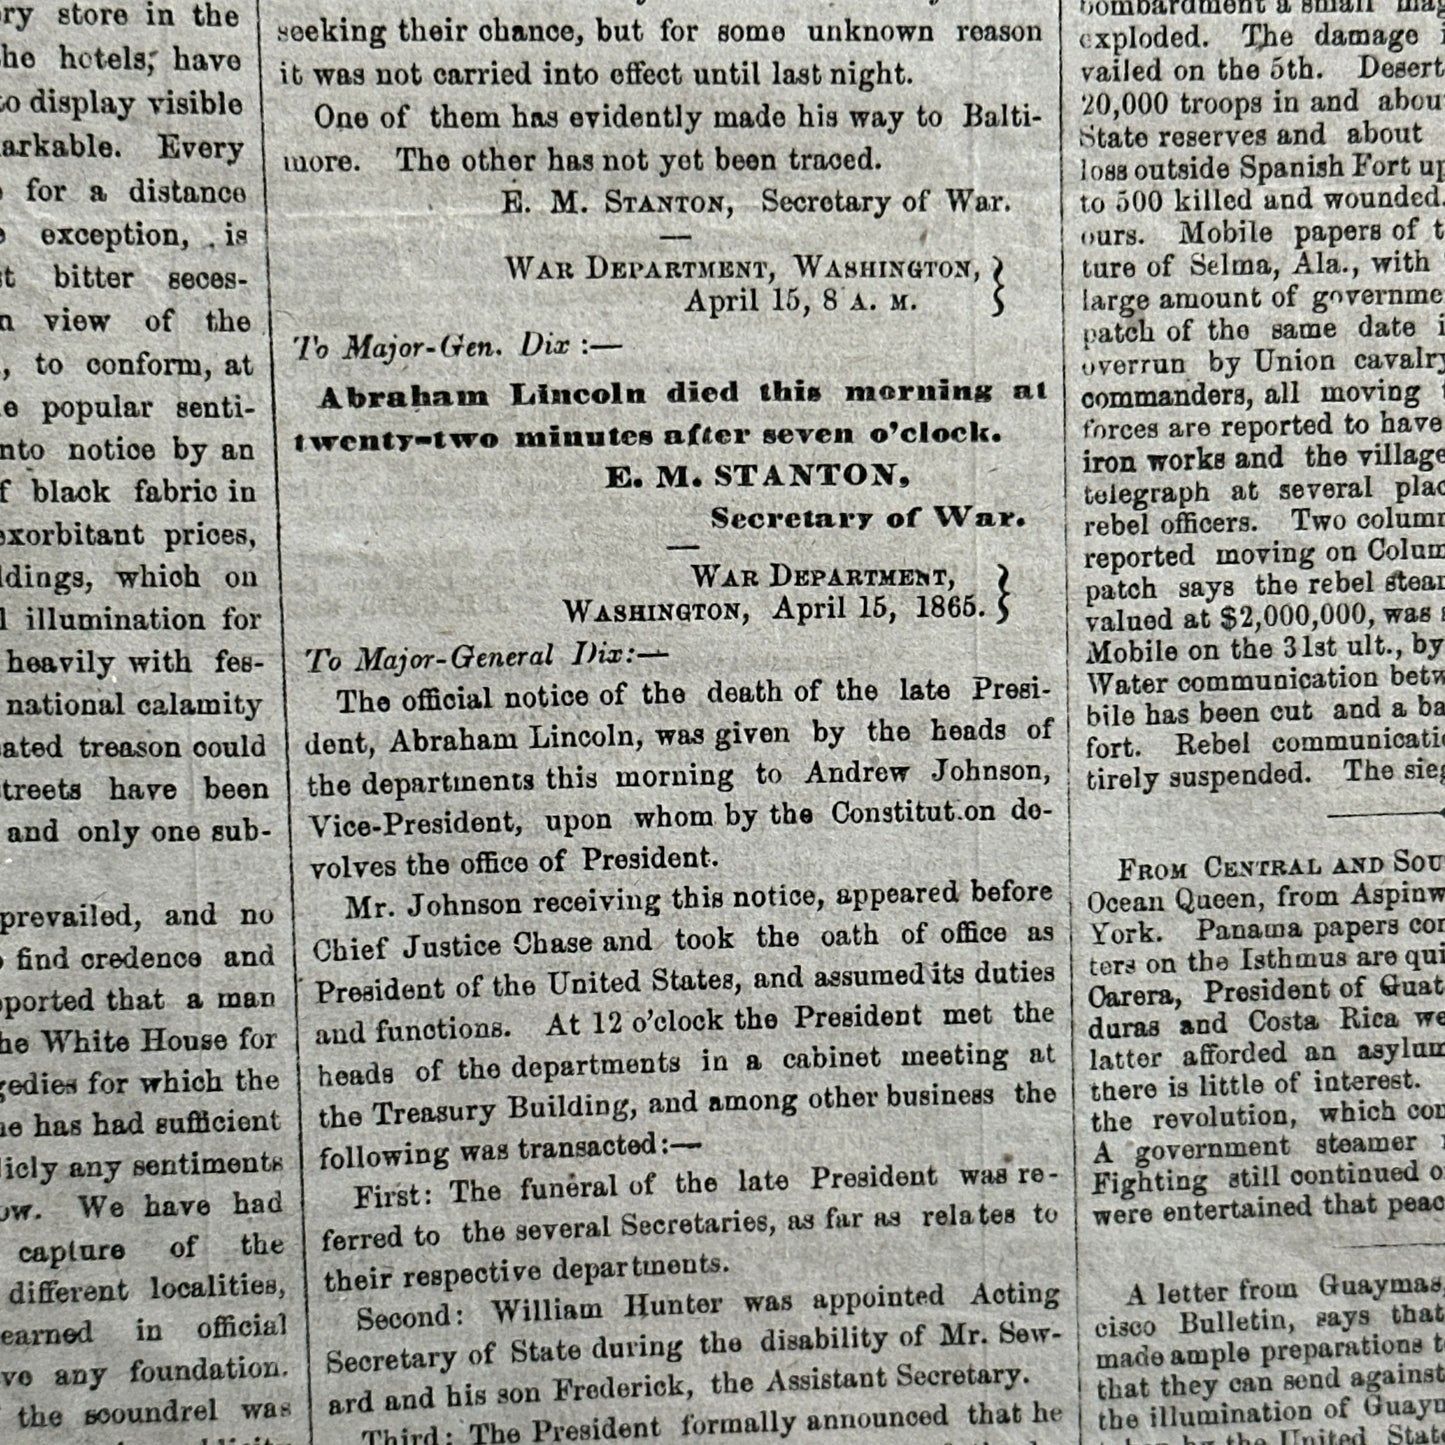 Framed April 17, 1865 newspaper reporting Lincoln's Assassination and Death and newspaper reporting on the trial